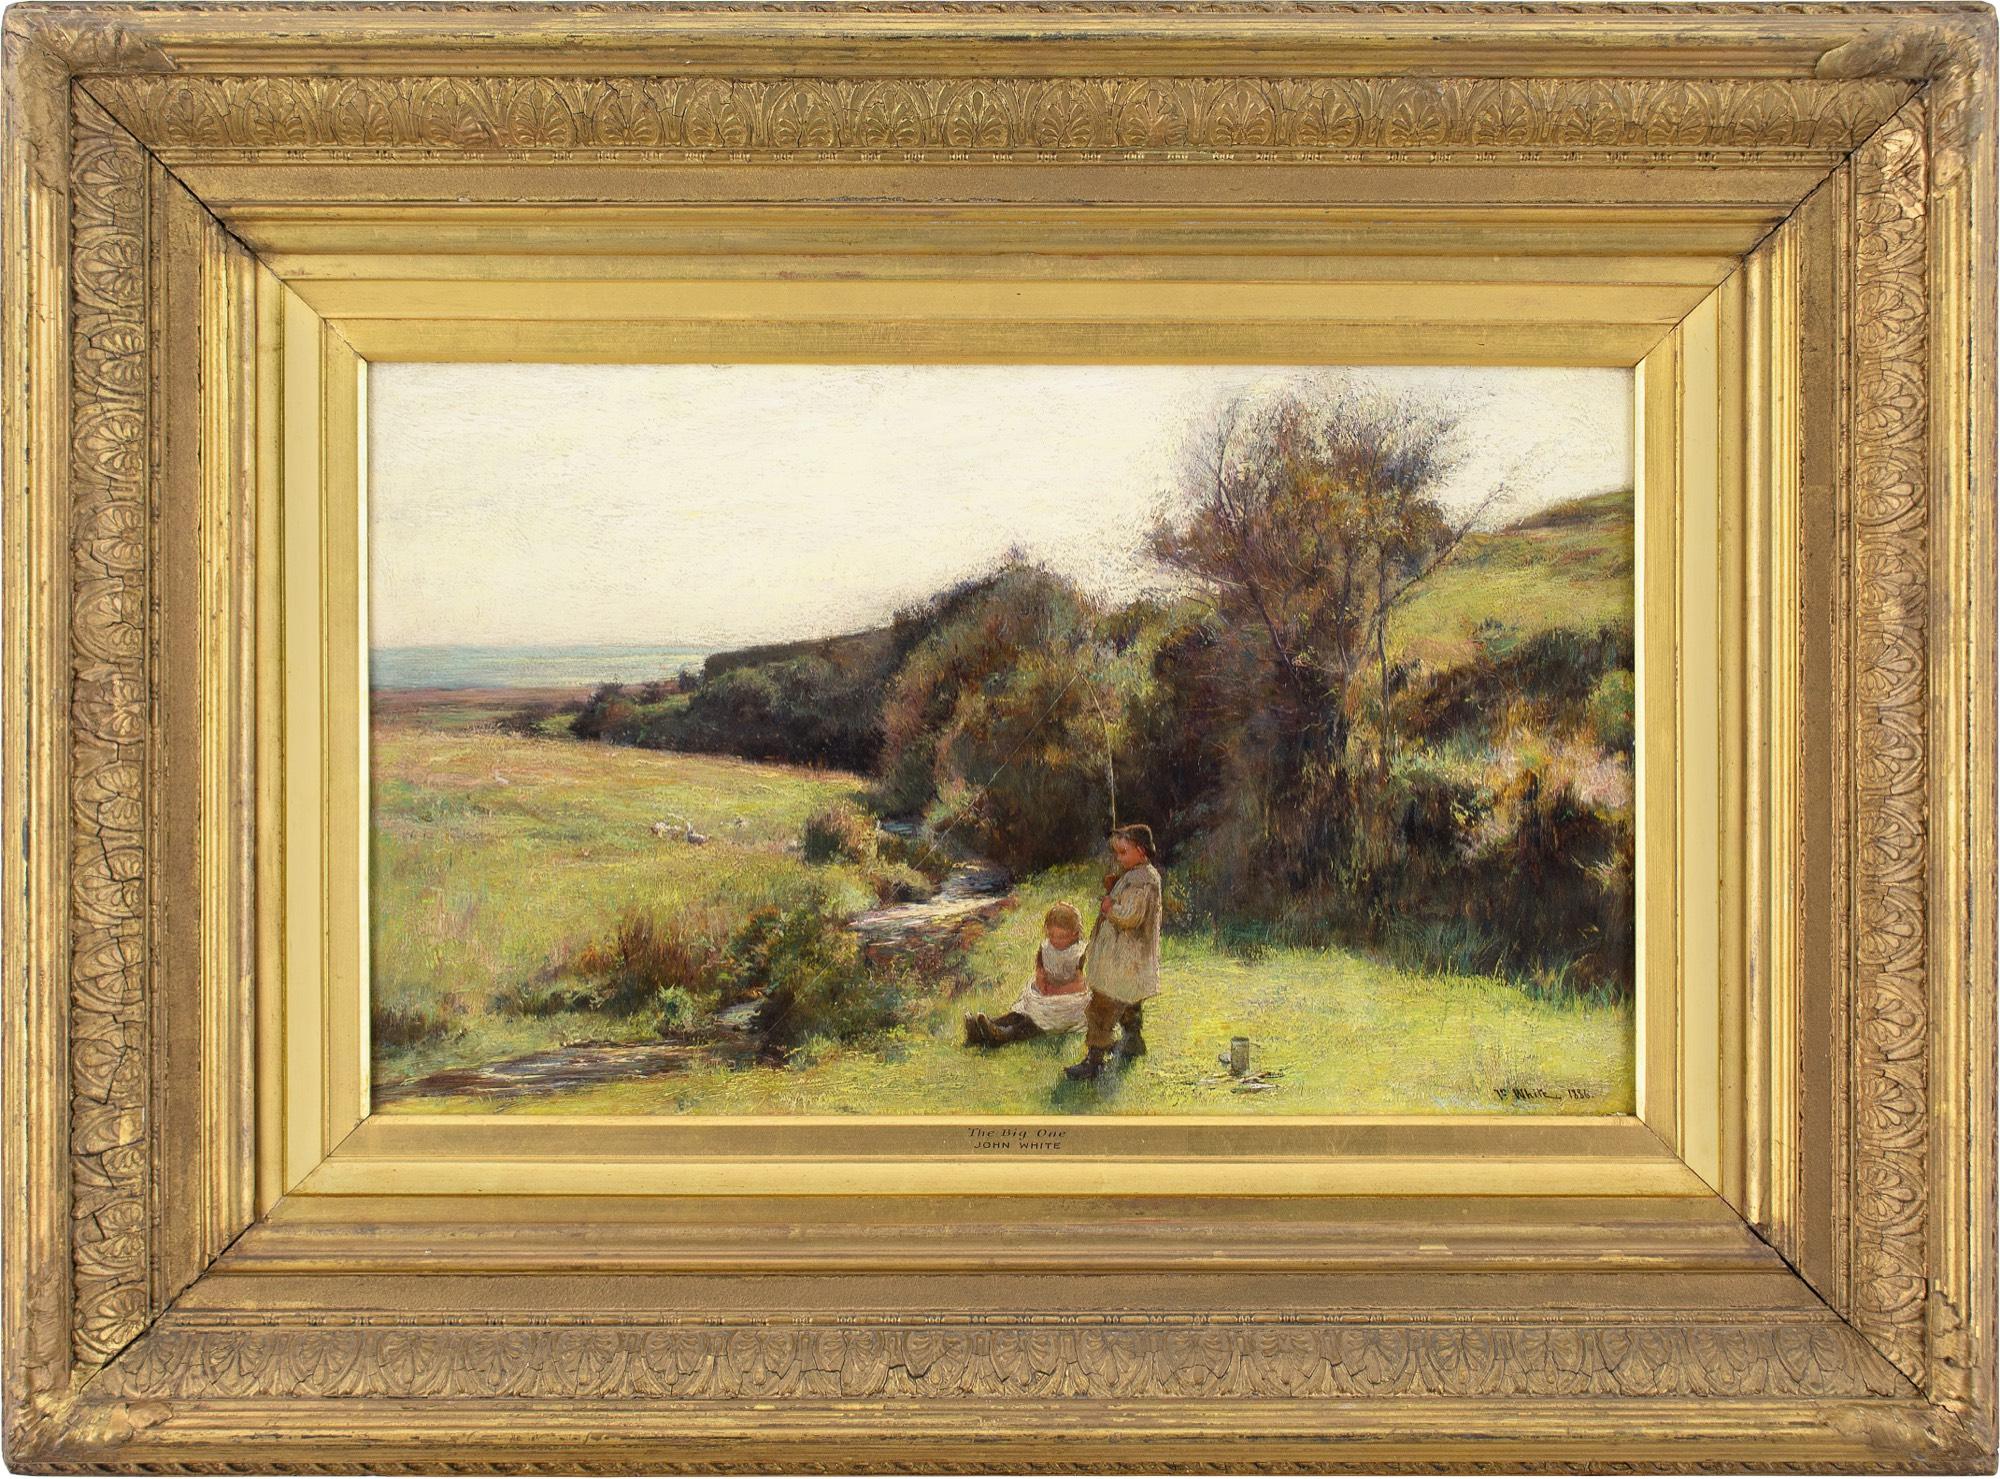 This late 19th-century oil painting by Scottish artist John White (1851-1933) depicts a boy fishing in a stream with the sea beyond.

With his line taut, he leans back and looks optimistically towards, what he hopes could be, 'The Big One'. A young